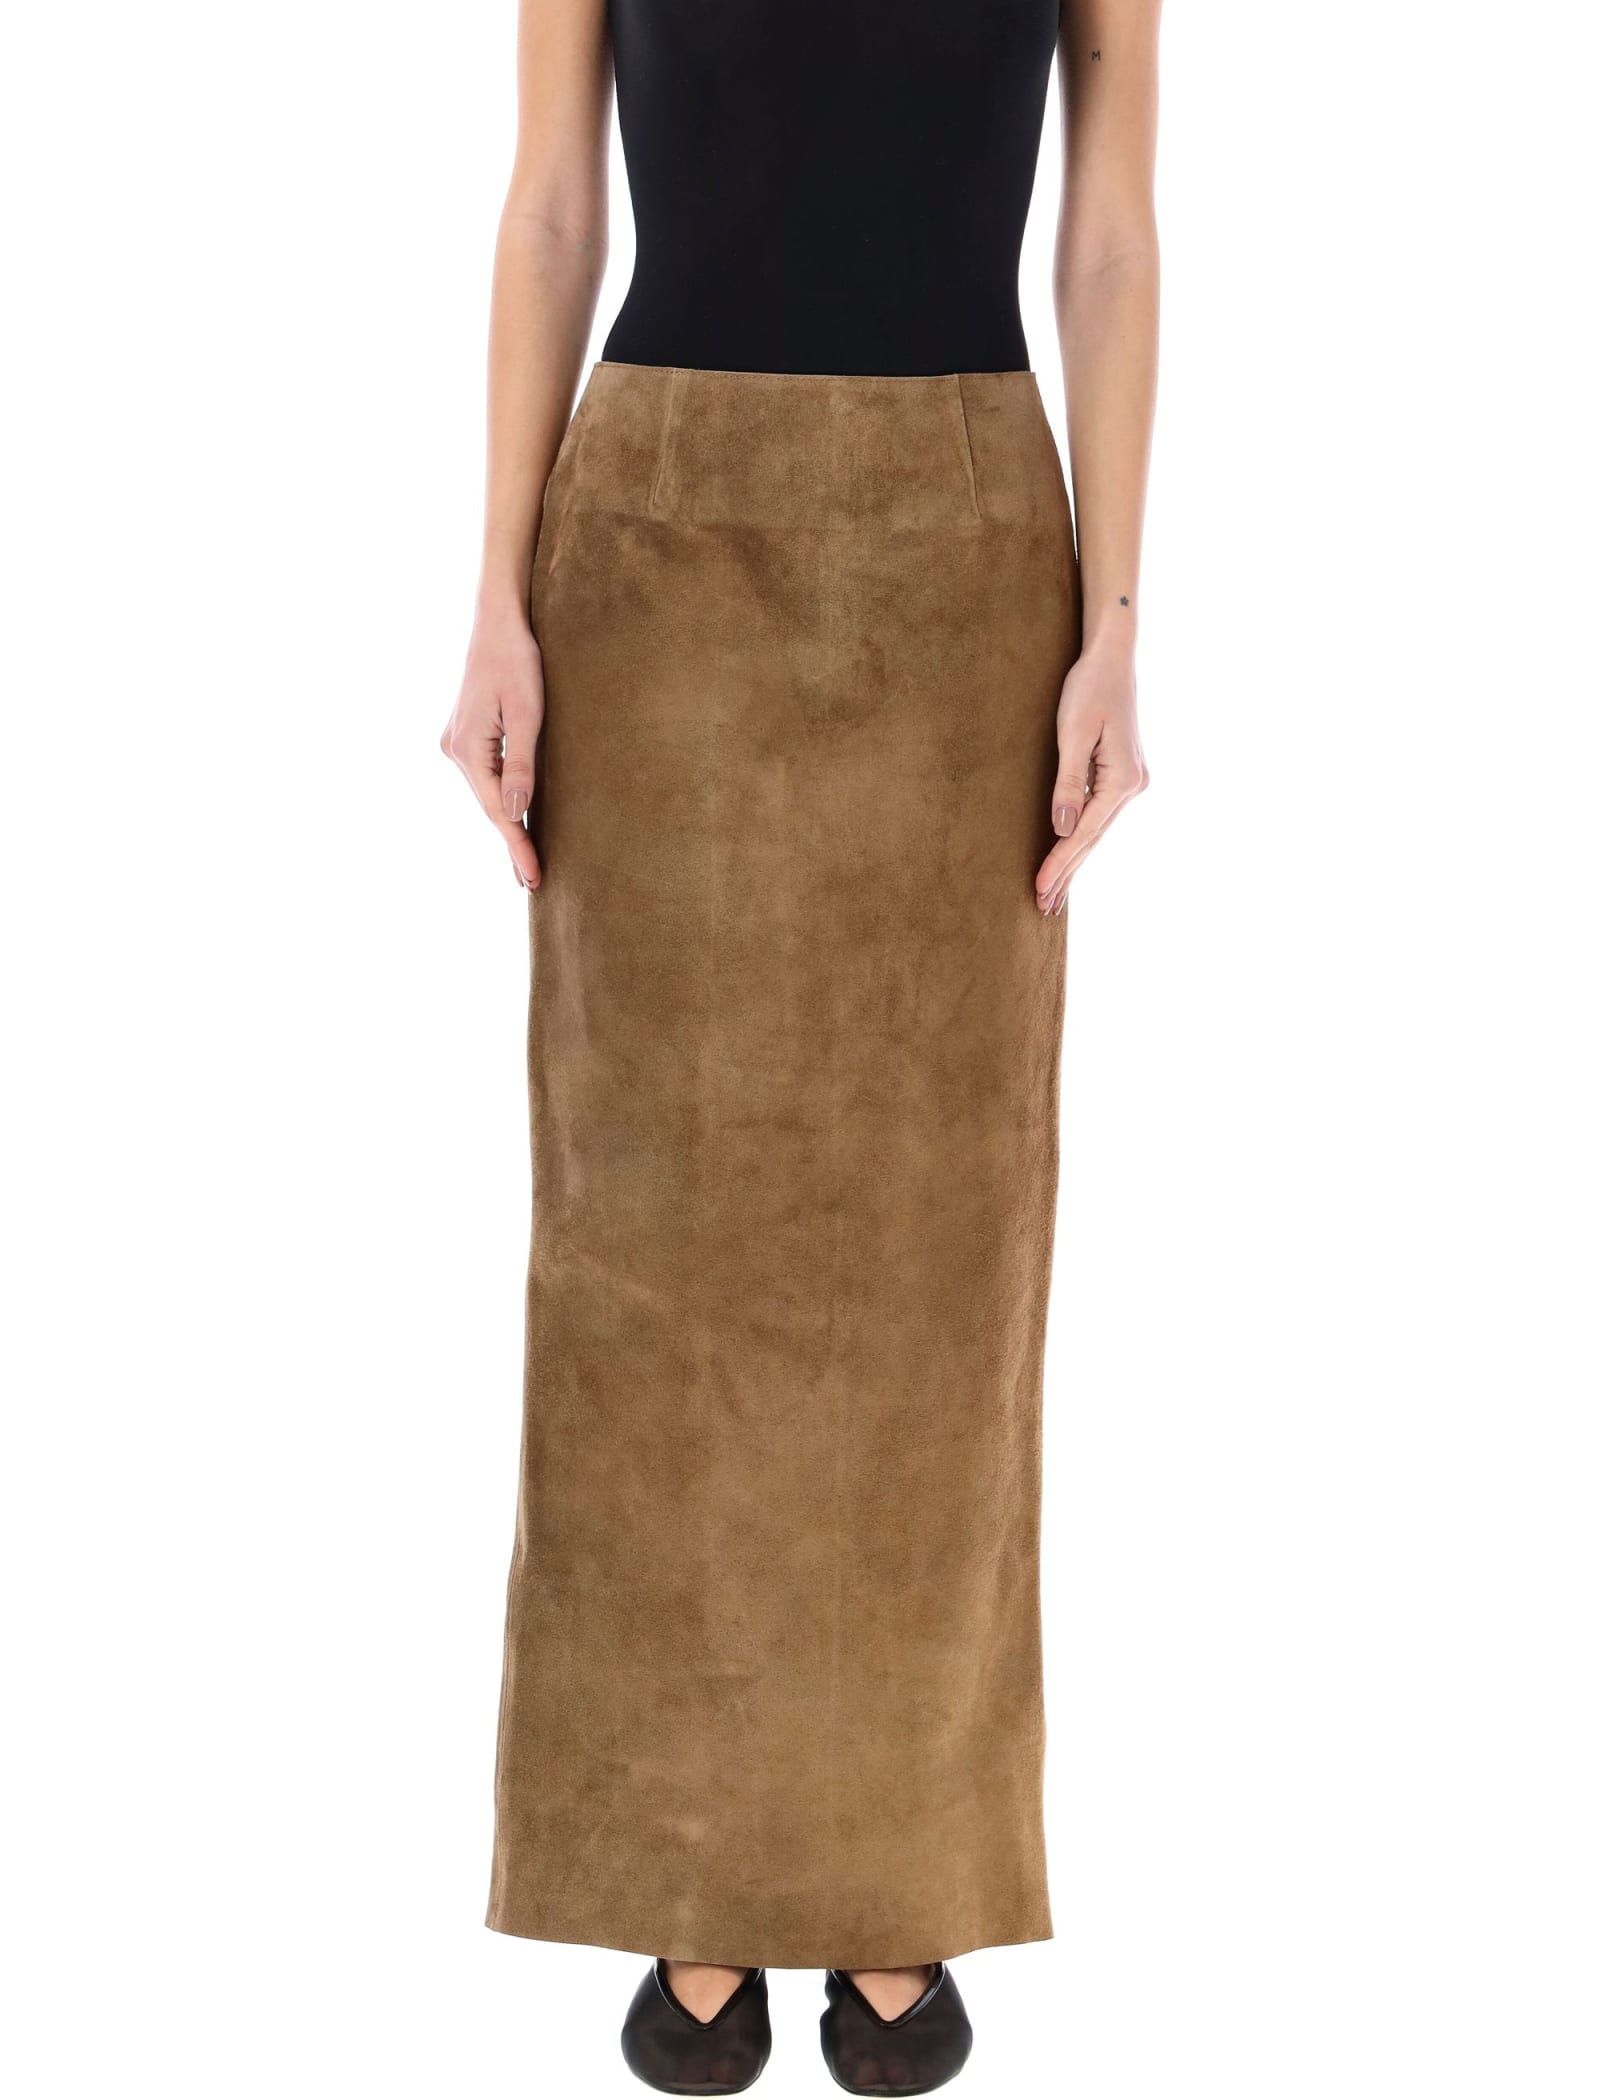 MARNI SUEDE LEATHER PENCIL SKIRT